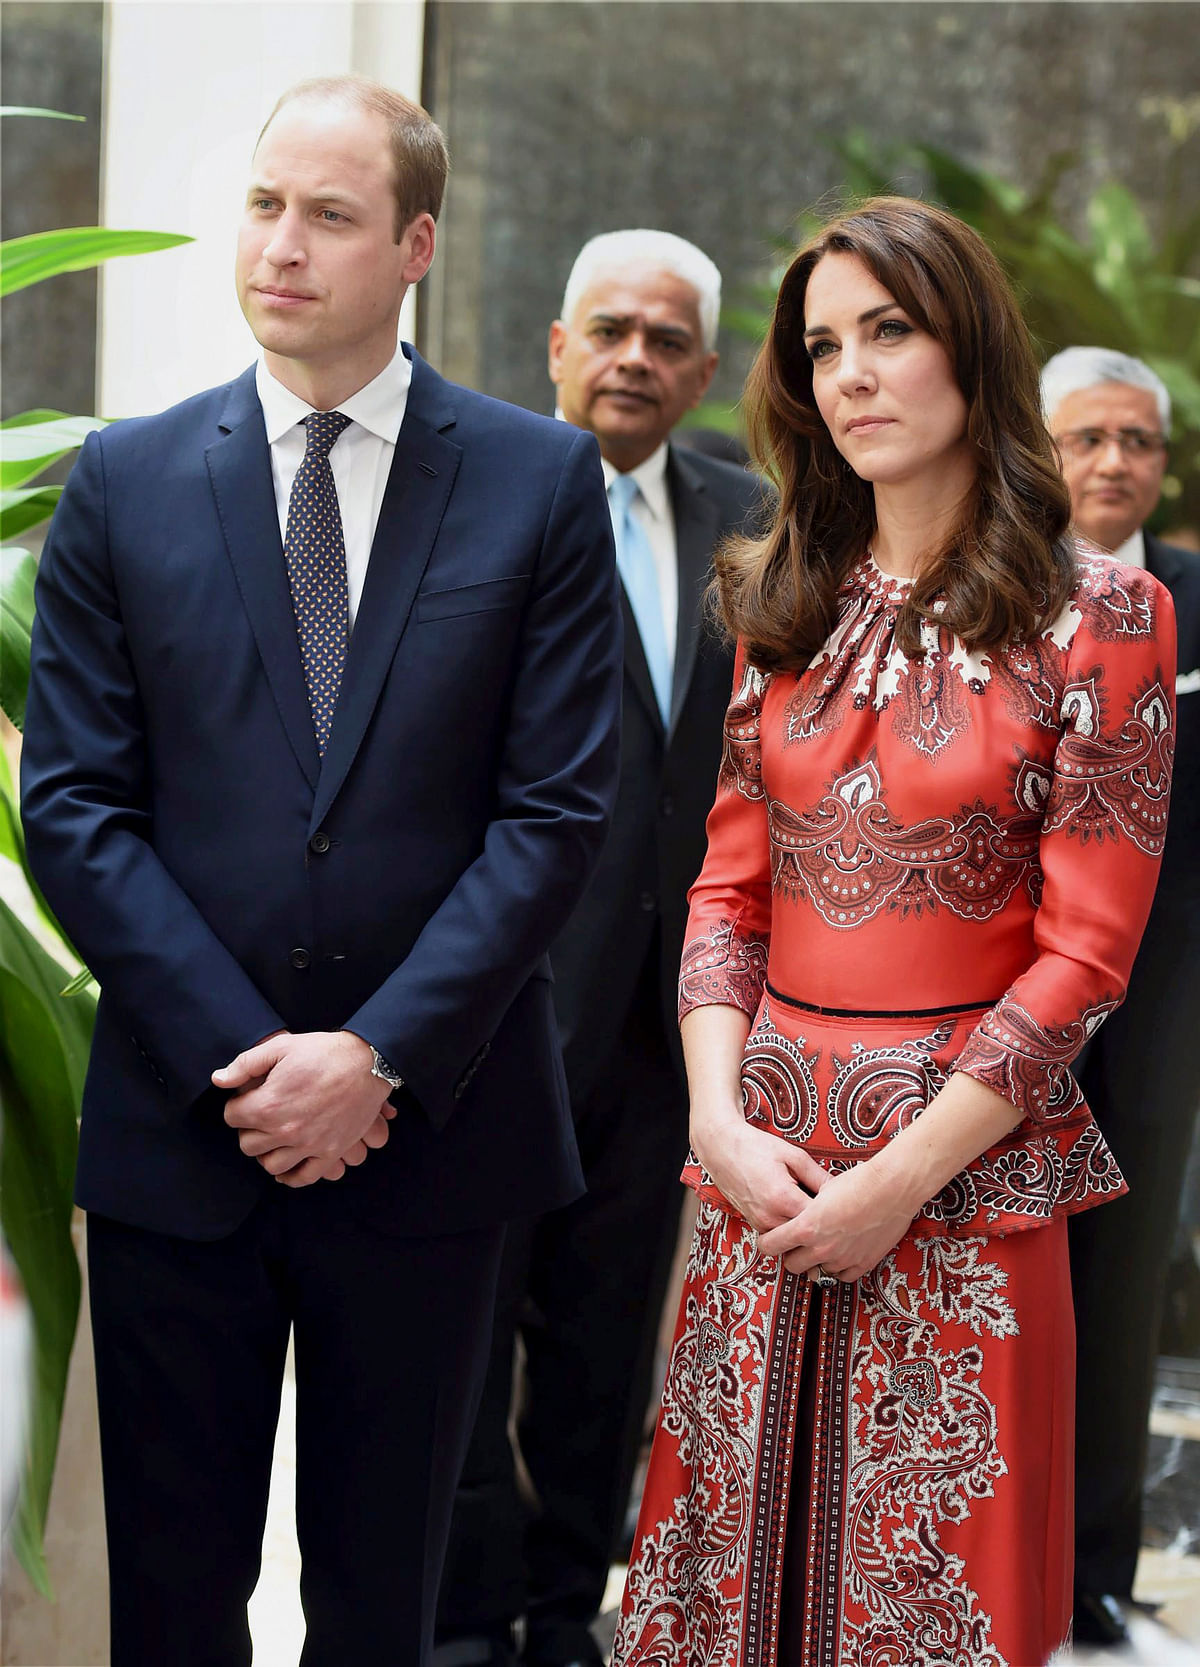 Shobhaa De body shames Kate Middleton, says she doesn’t have the curves to wear a saree.